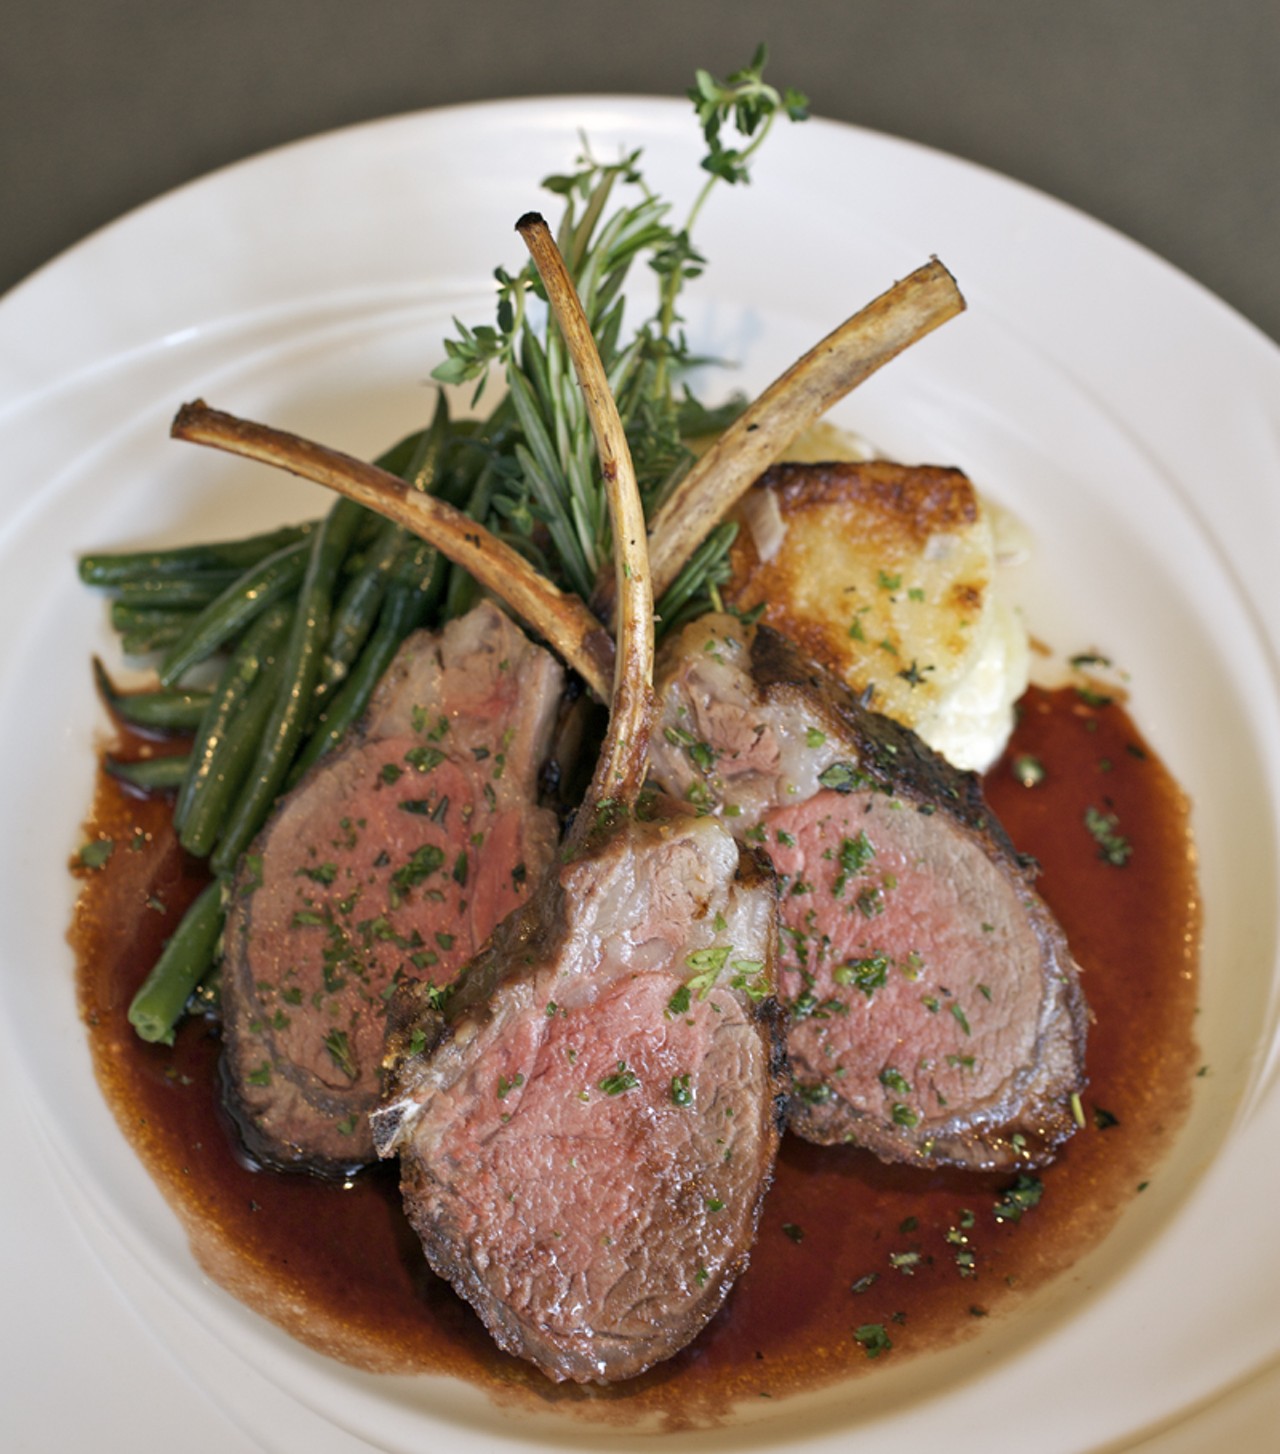 Carr&eacute; d&rsquo;agneau au thym, is an entr&eacute;e at Chez Leon. It is rack of Colorado lamb, dauphinois potatoes and is served with a thyme port sauce.